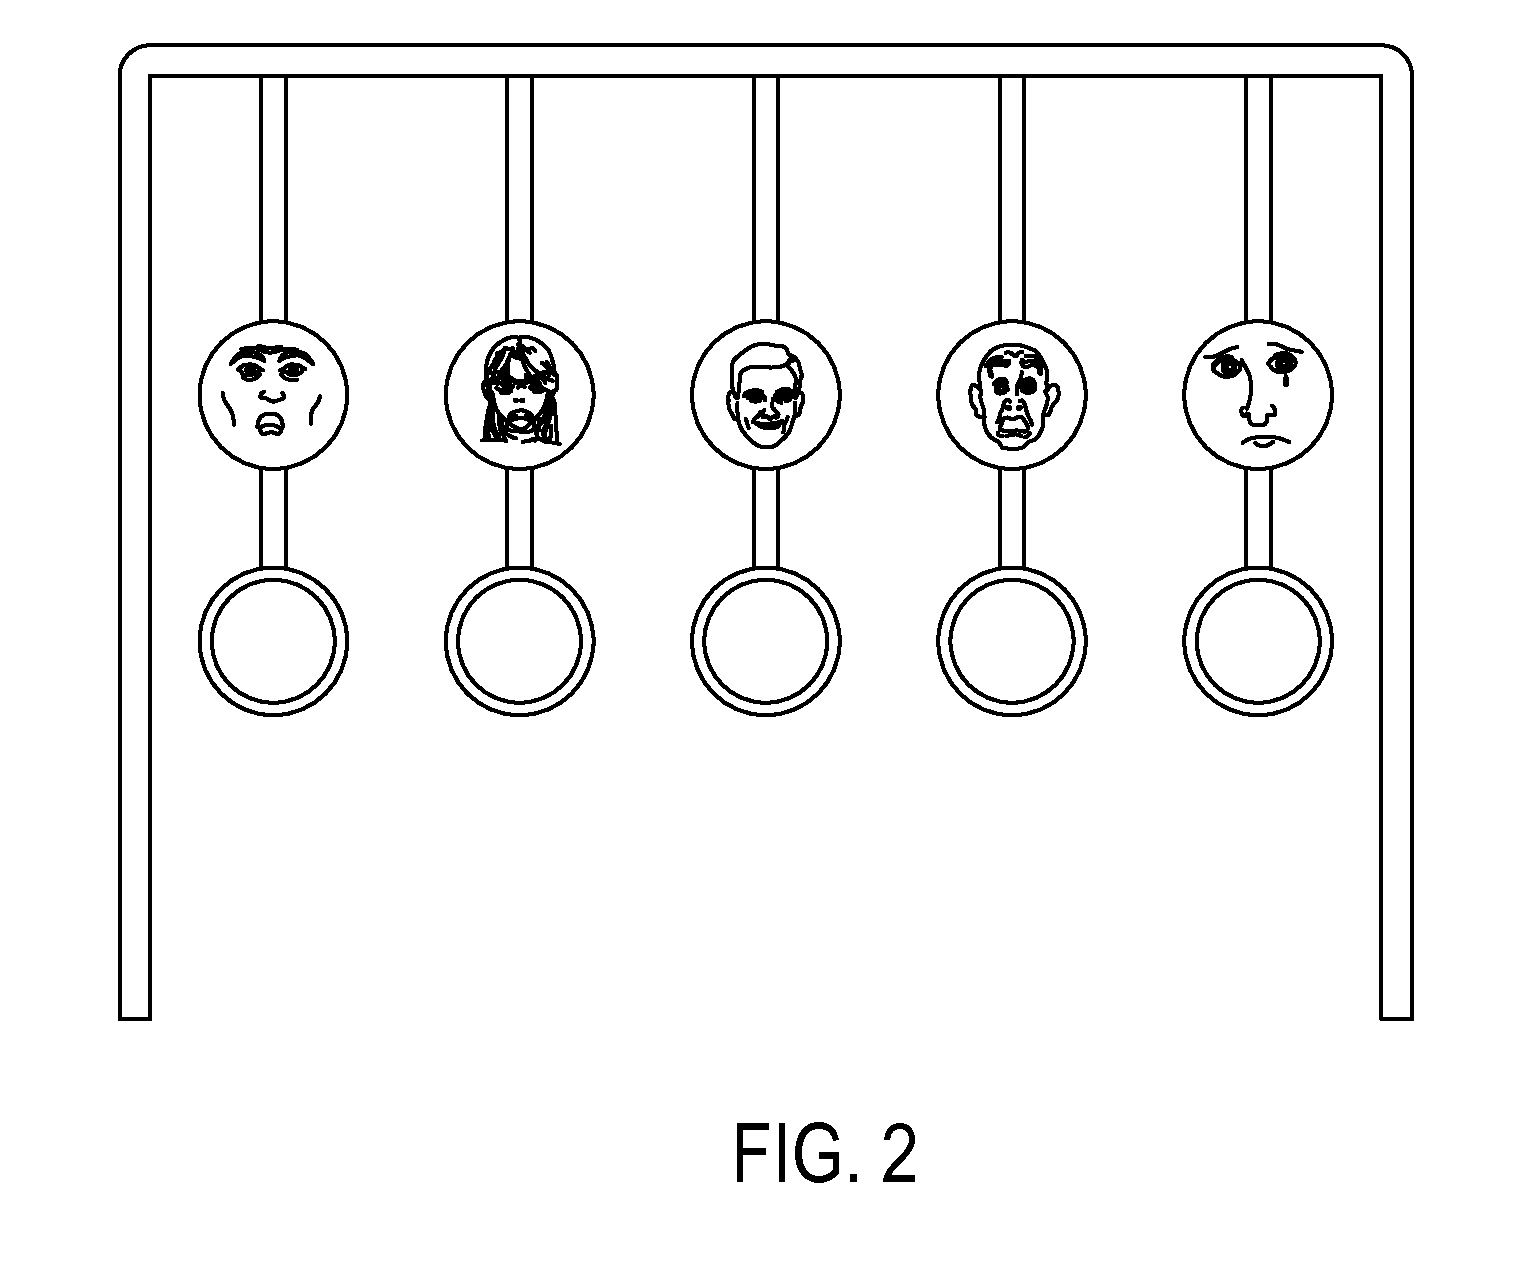 System And Method For Associating Auditory Stimuli With Visual Depictions